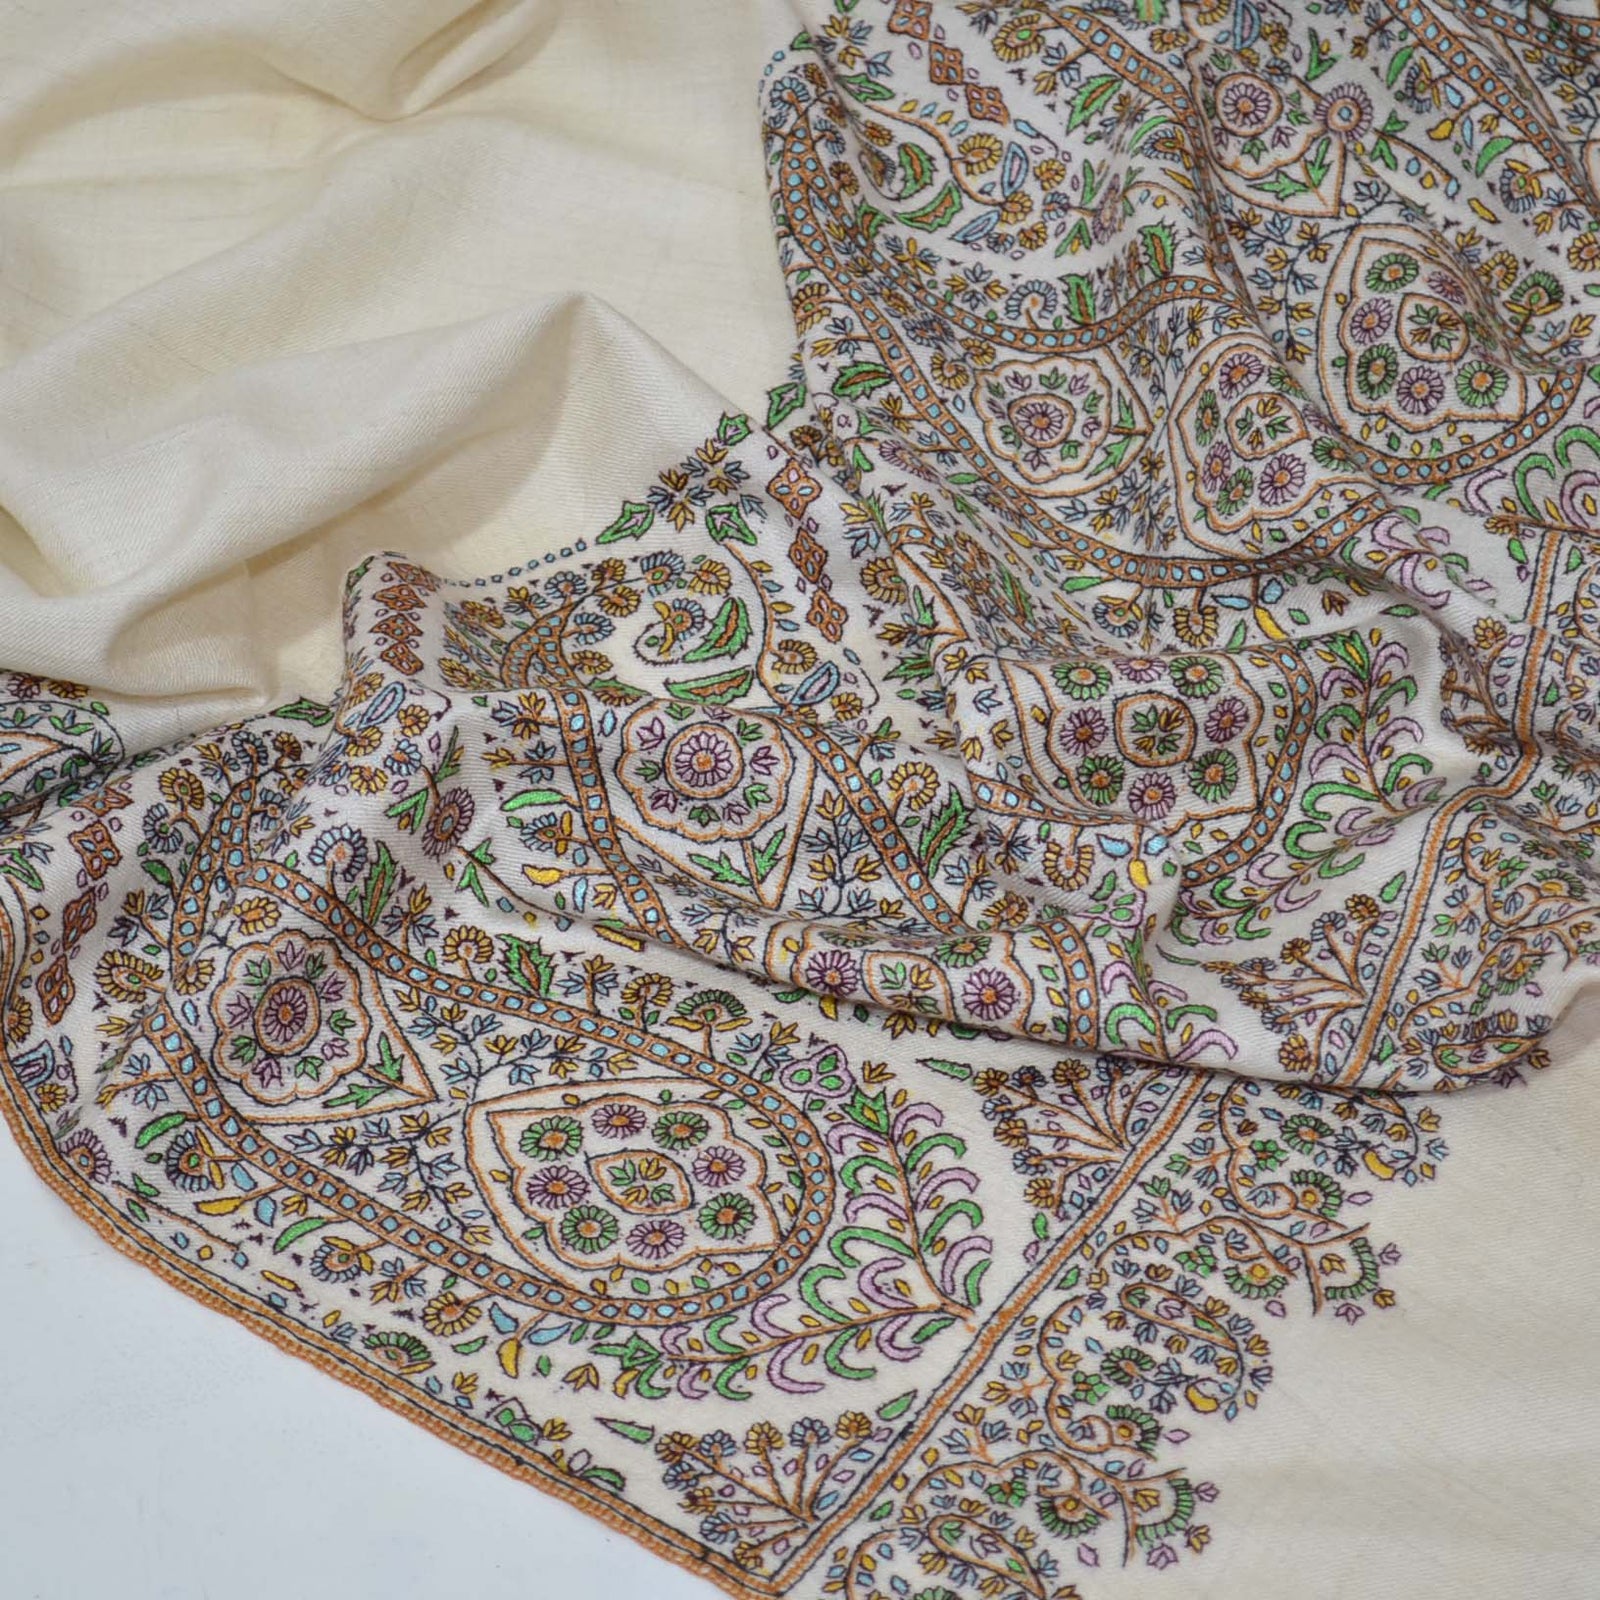 Pure Pashmina shawl with embroidery (G.I certified) - Baraqah